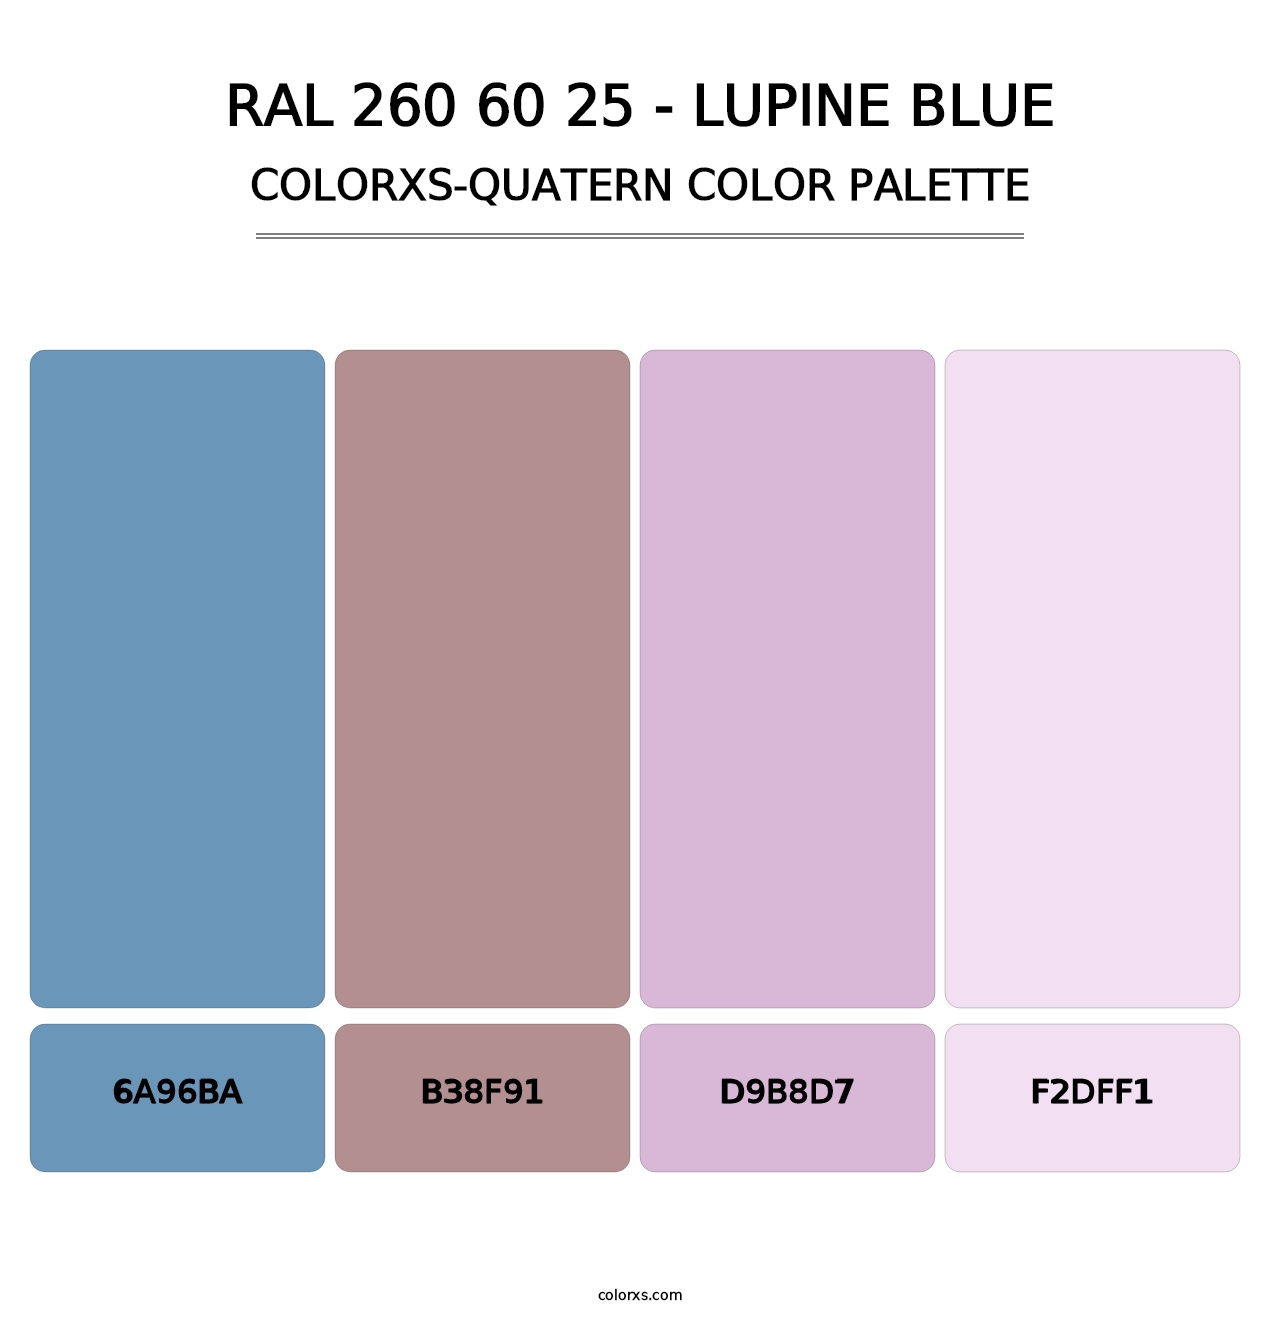 RAL 260 60 25 - Lupine Blue - Colorxs Quatern Palette